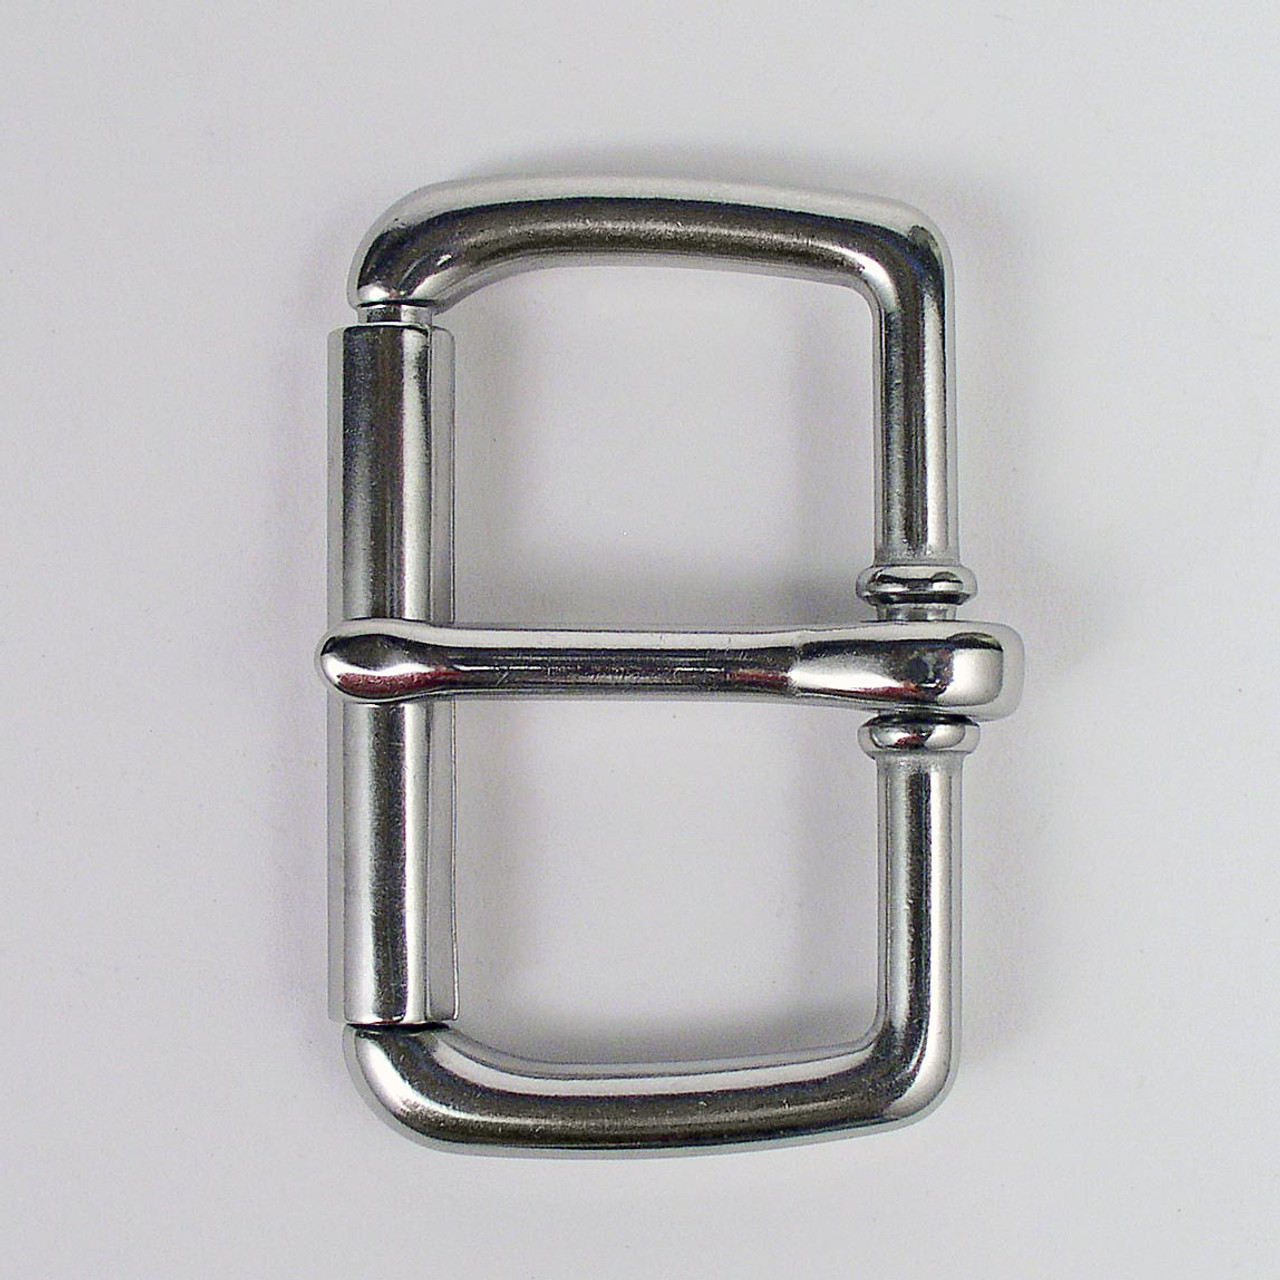 2 inch Roller Buckles Stainless Steel Belt And Strap Buckle - RB200SS -  Leathersmith Designs Inc.